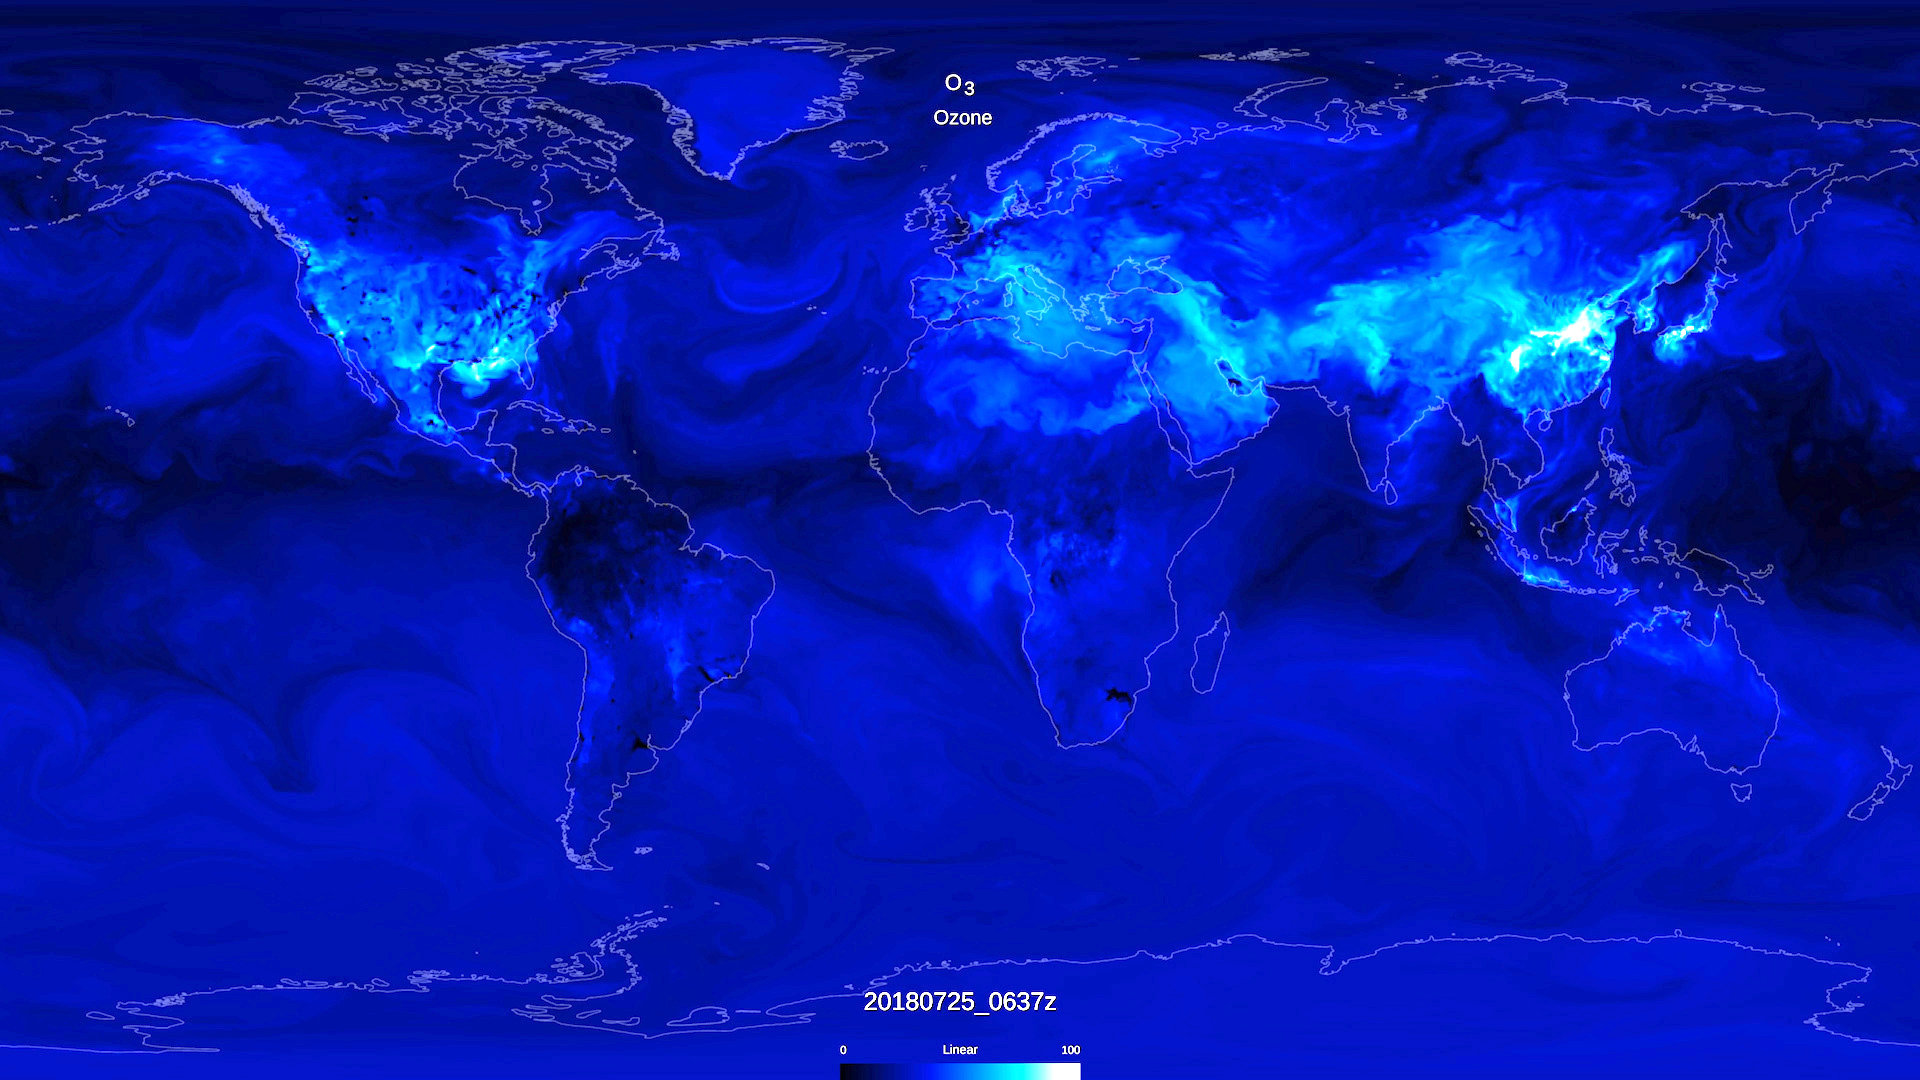 While ozone in the stratosphere is critical to maintaining life on Earth, surface ozone, shown here, is a toxic gas to most plant and animal species. NASA merges satellite data with models to provide a snapshot of chemistry throughout the atmosphere at any given time and help predict air quality worldwide. Credits: NASA's Goddard Space Flight Center/Scientific Visualization Studio